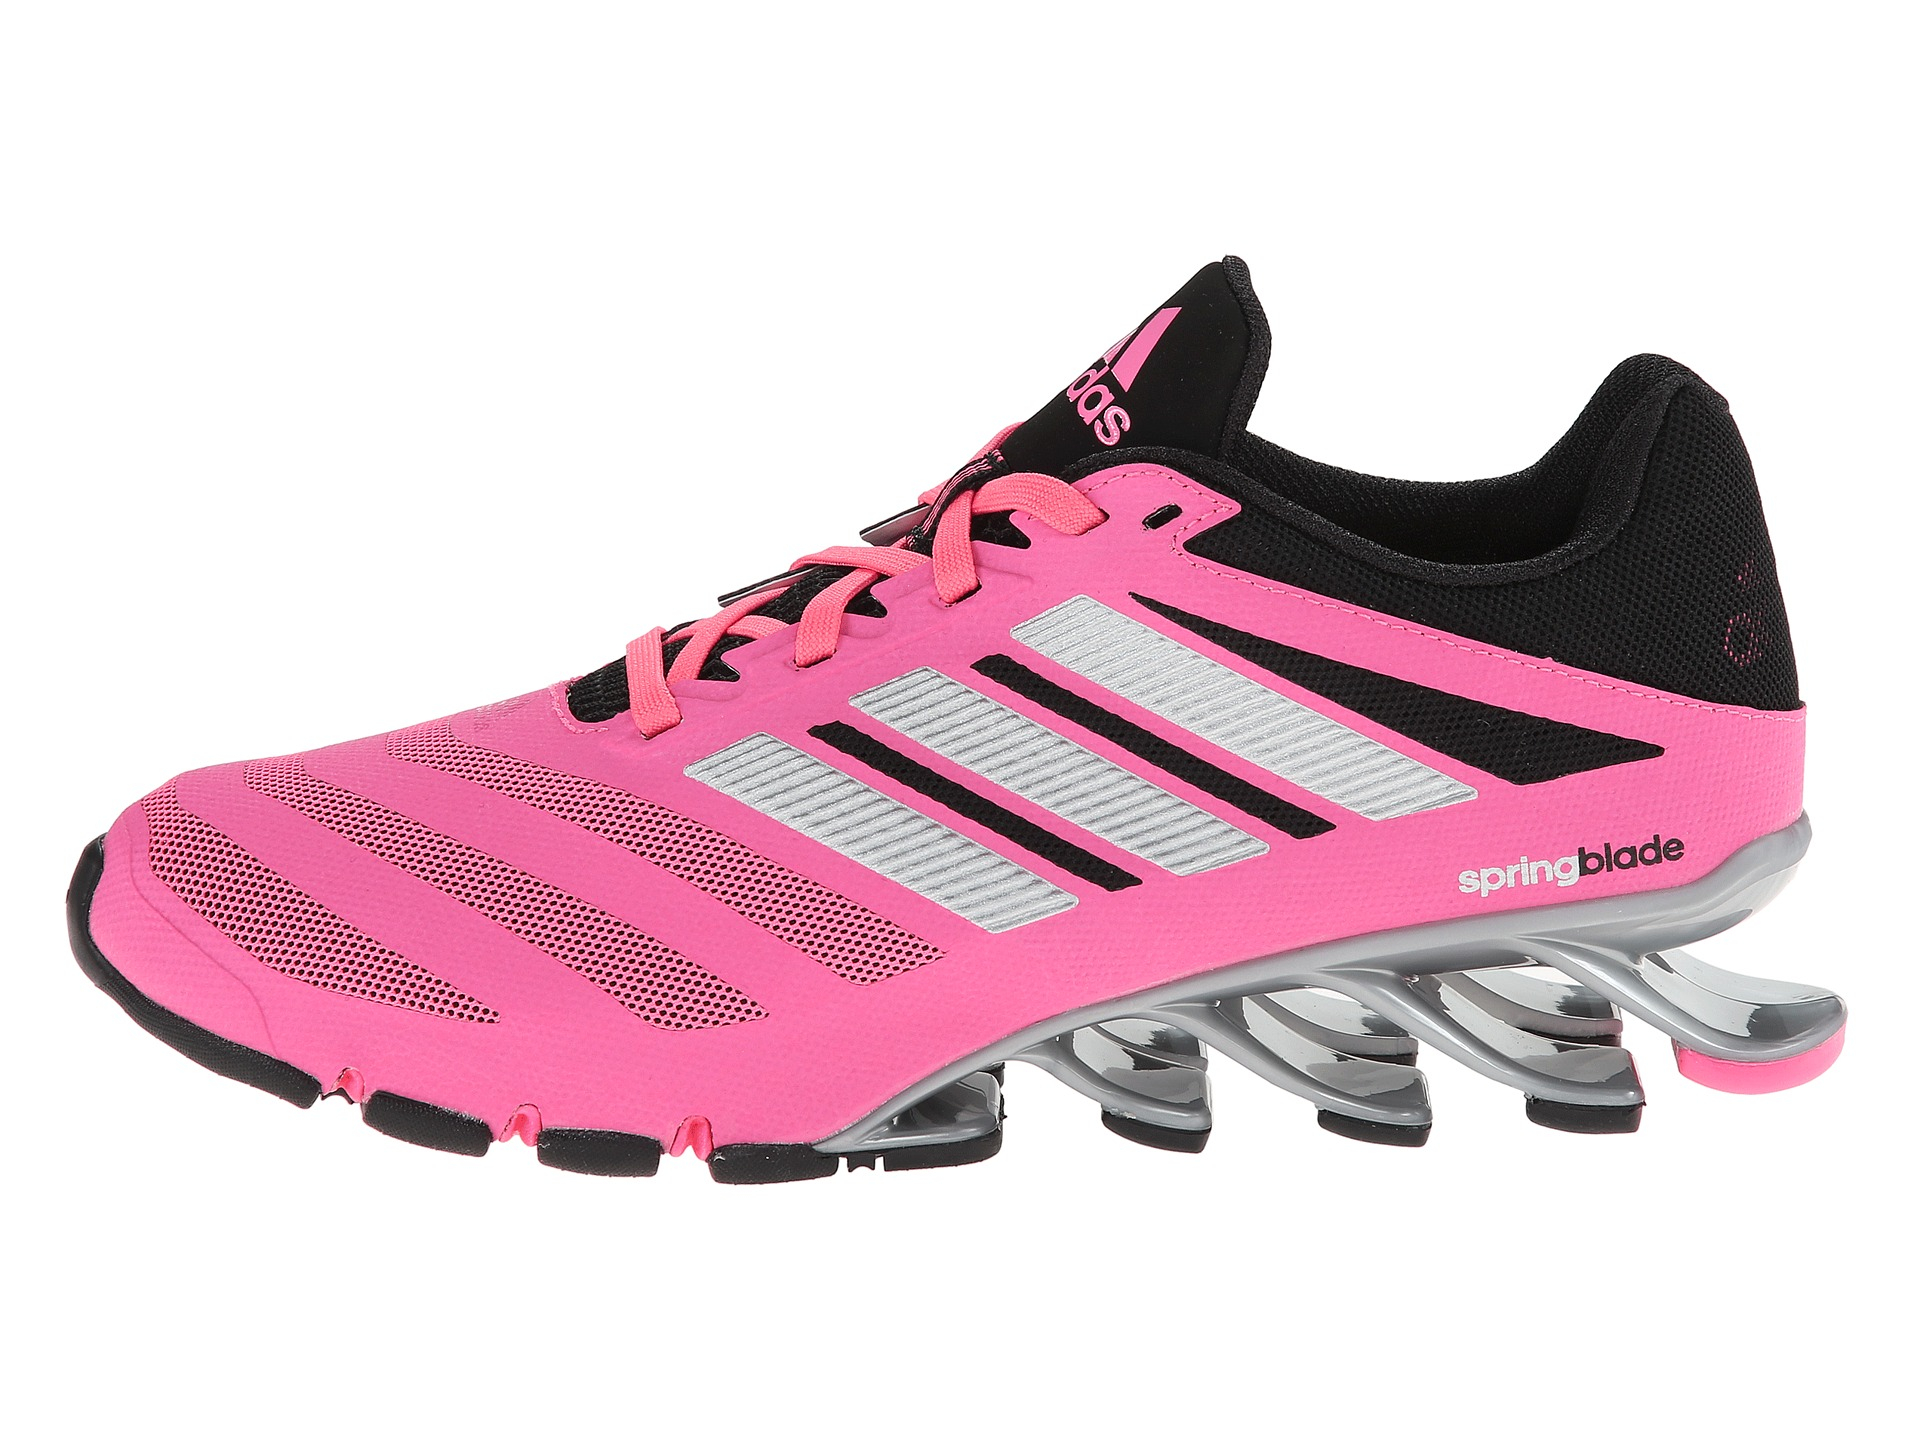 adidas Springblade Ignite in Pink - Lyst